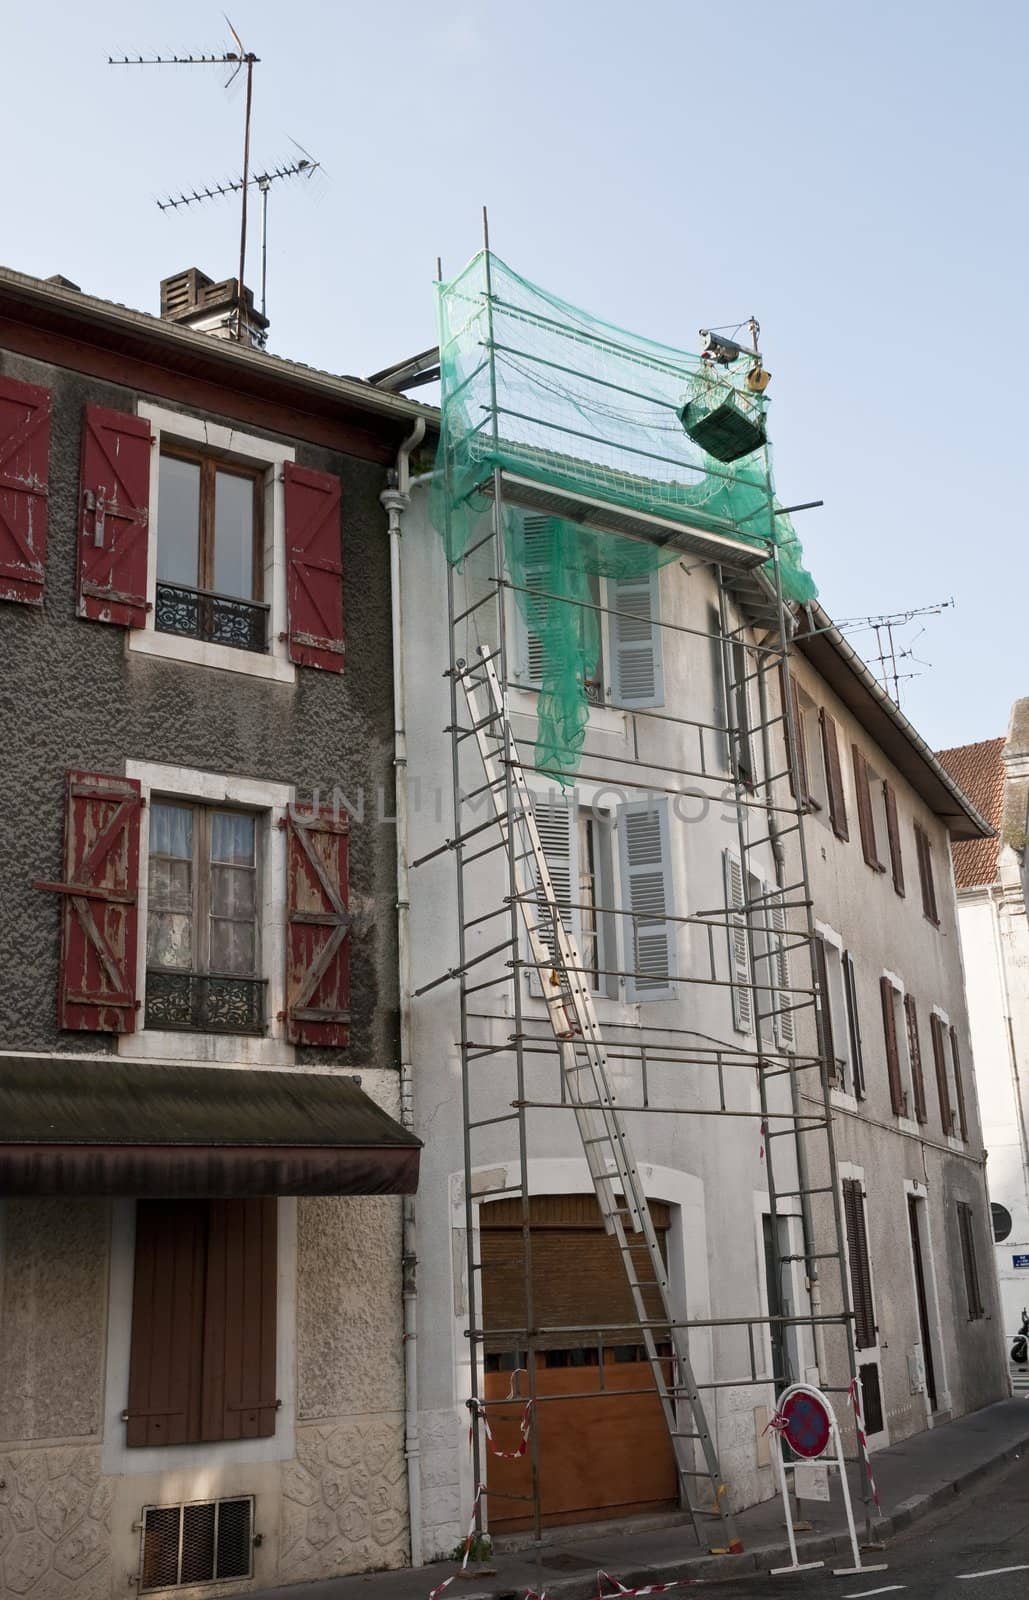 Scaffolding fixed on a fa�ade in a little street